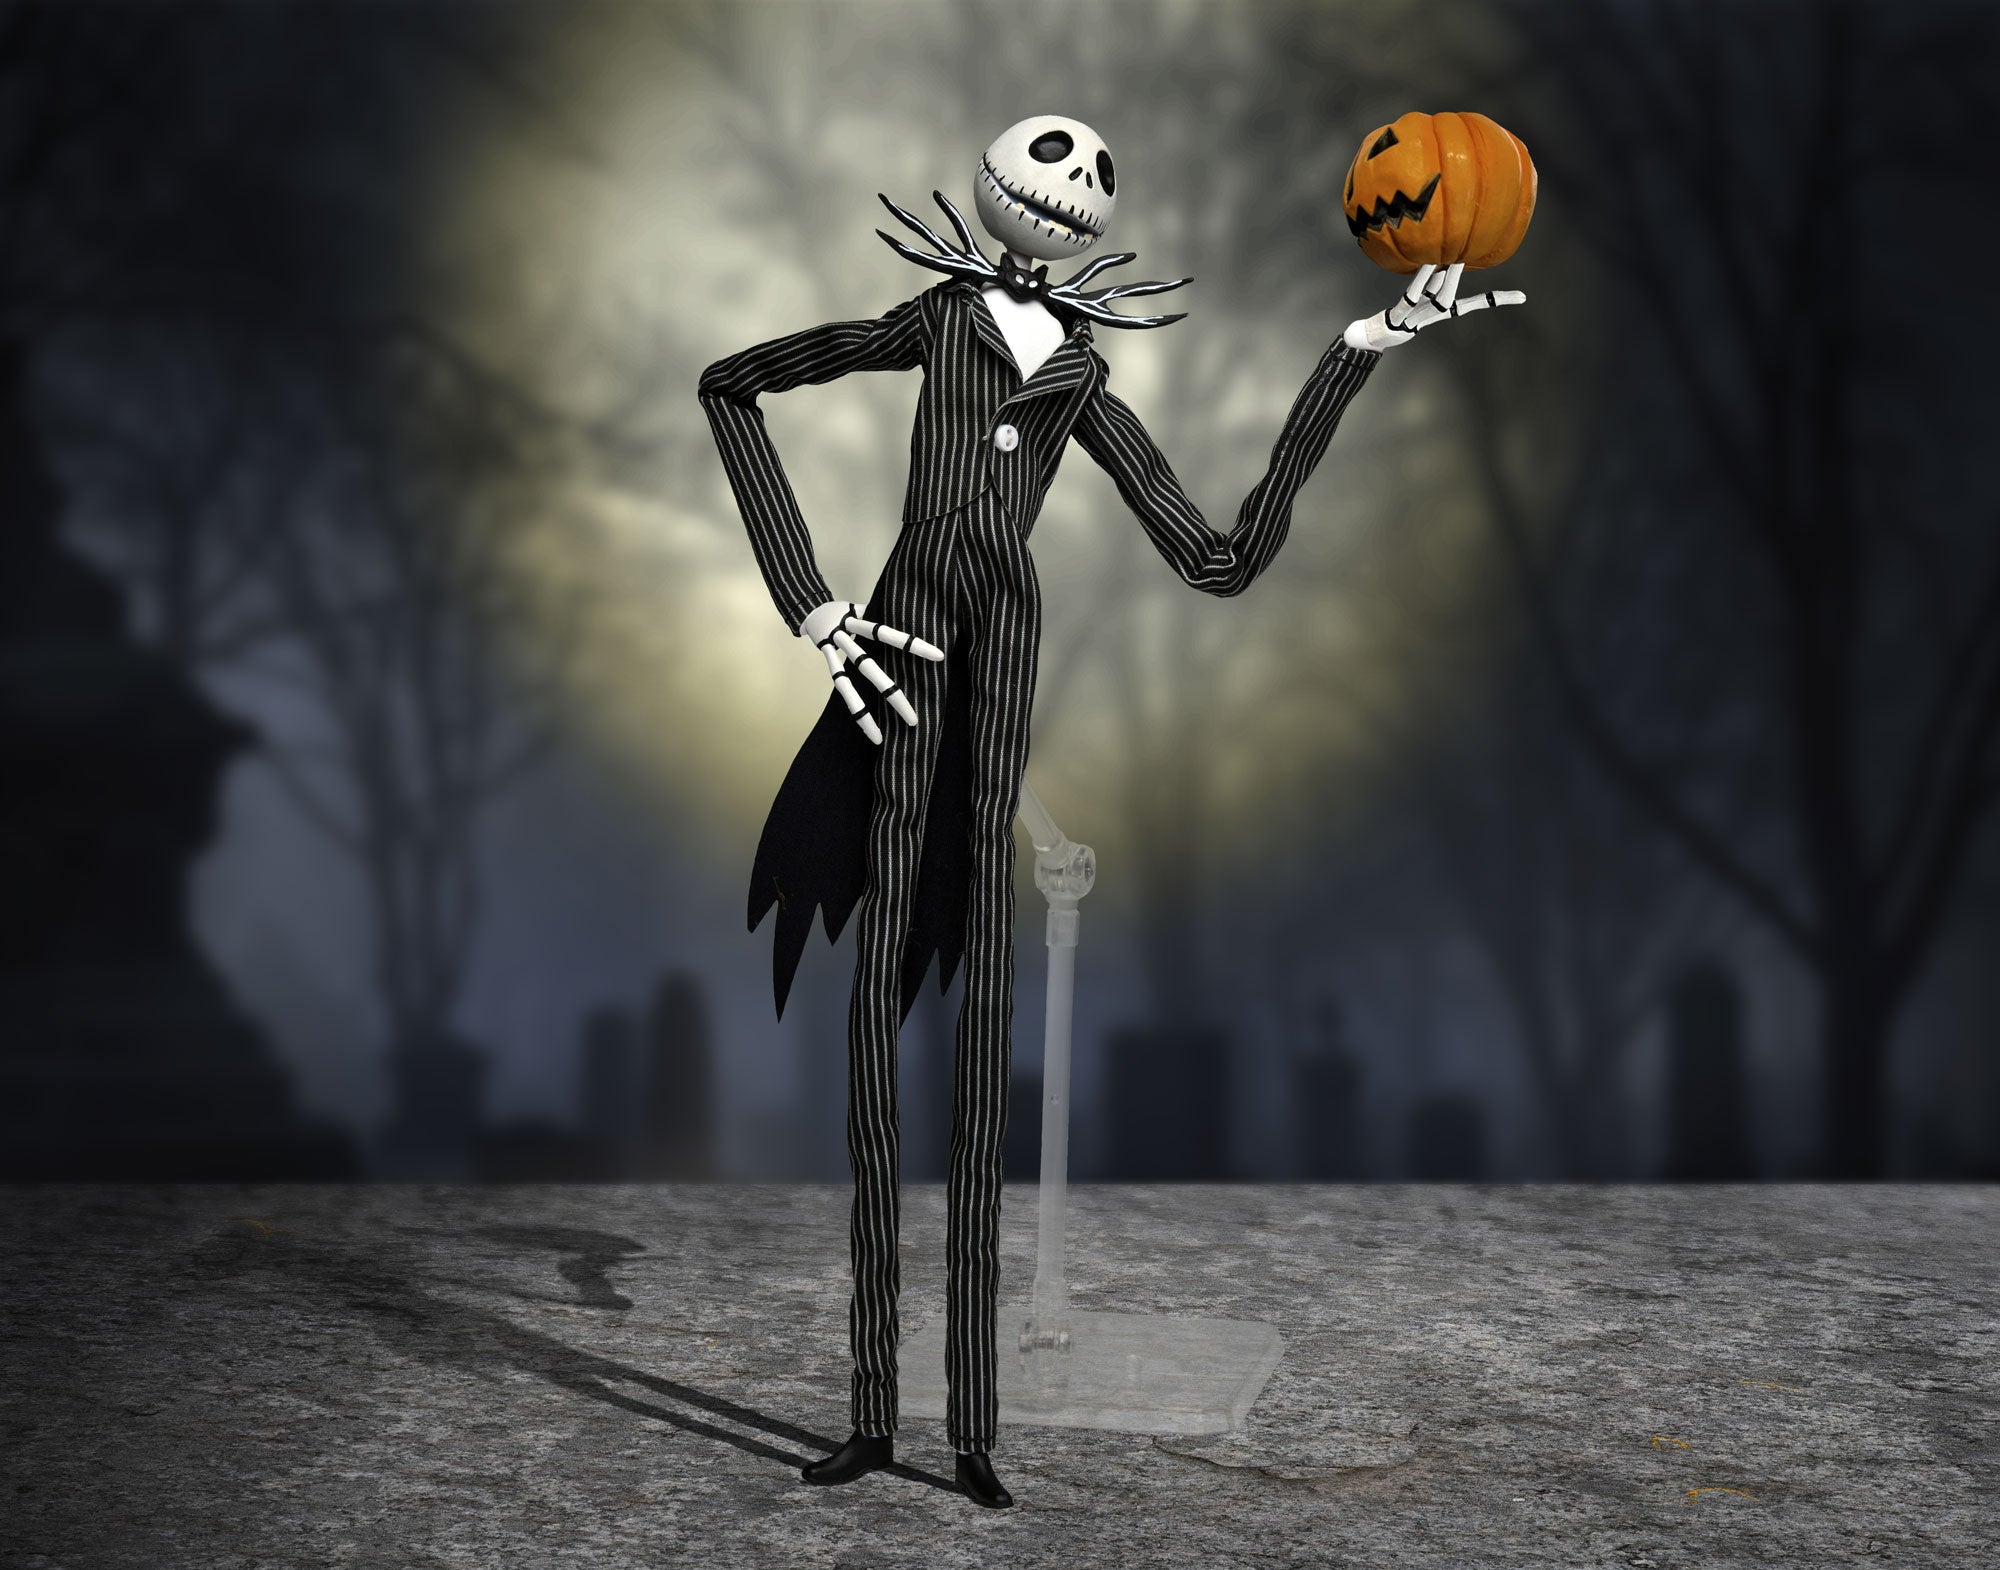 Opinion  'The Nightmare Before Christmas' is not a Christmas